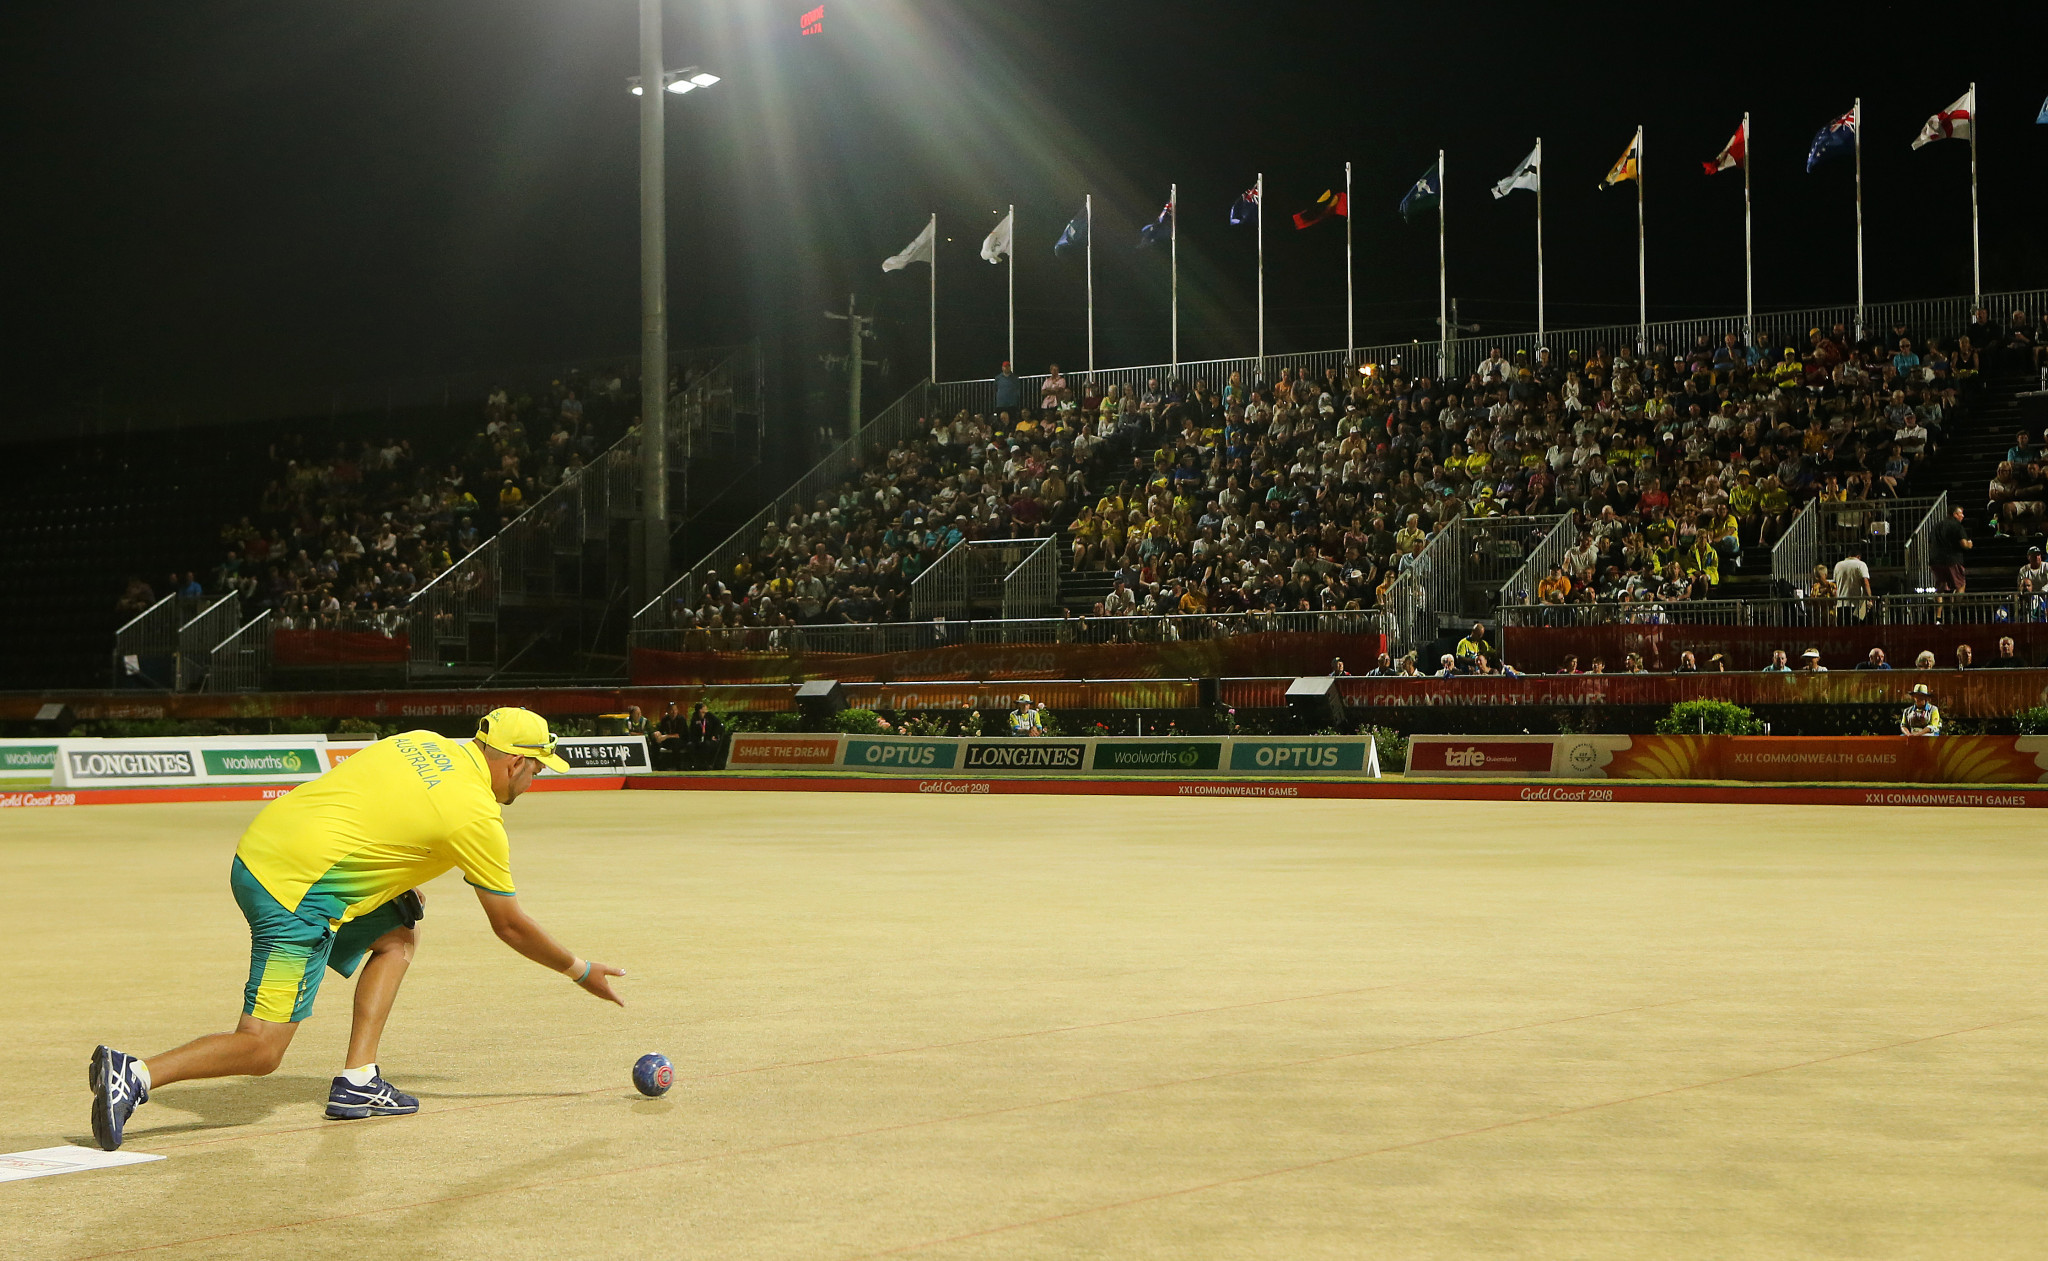 Australia to face rest of the world team in newly launched World Bowls Challenge